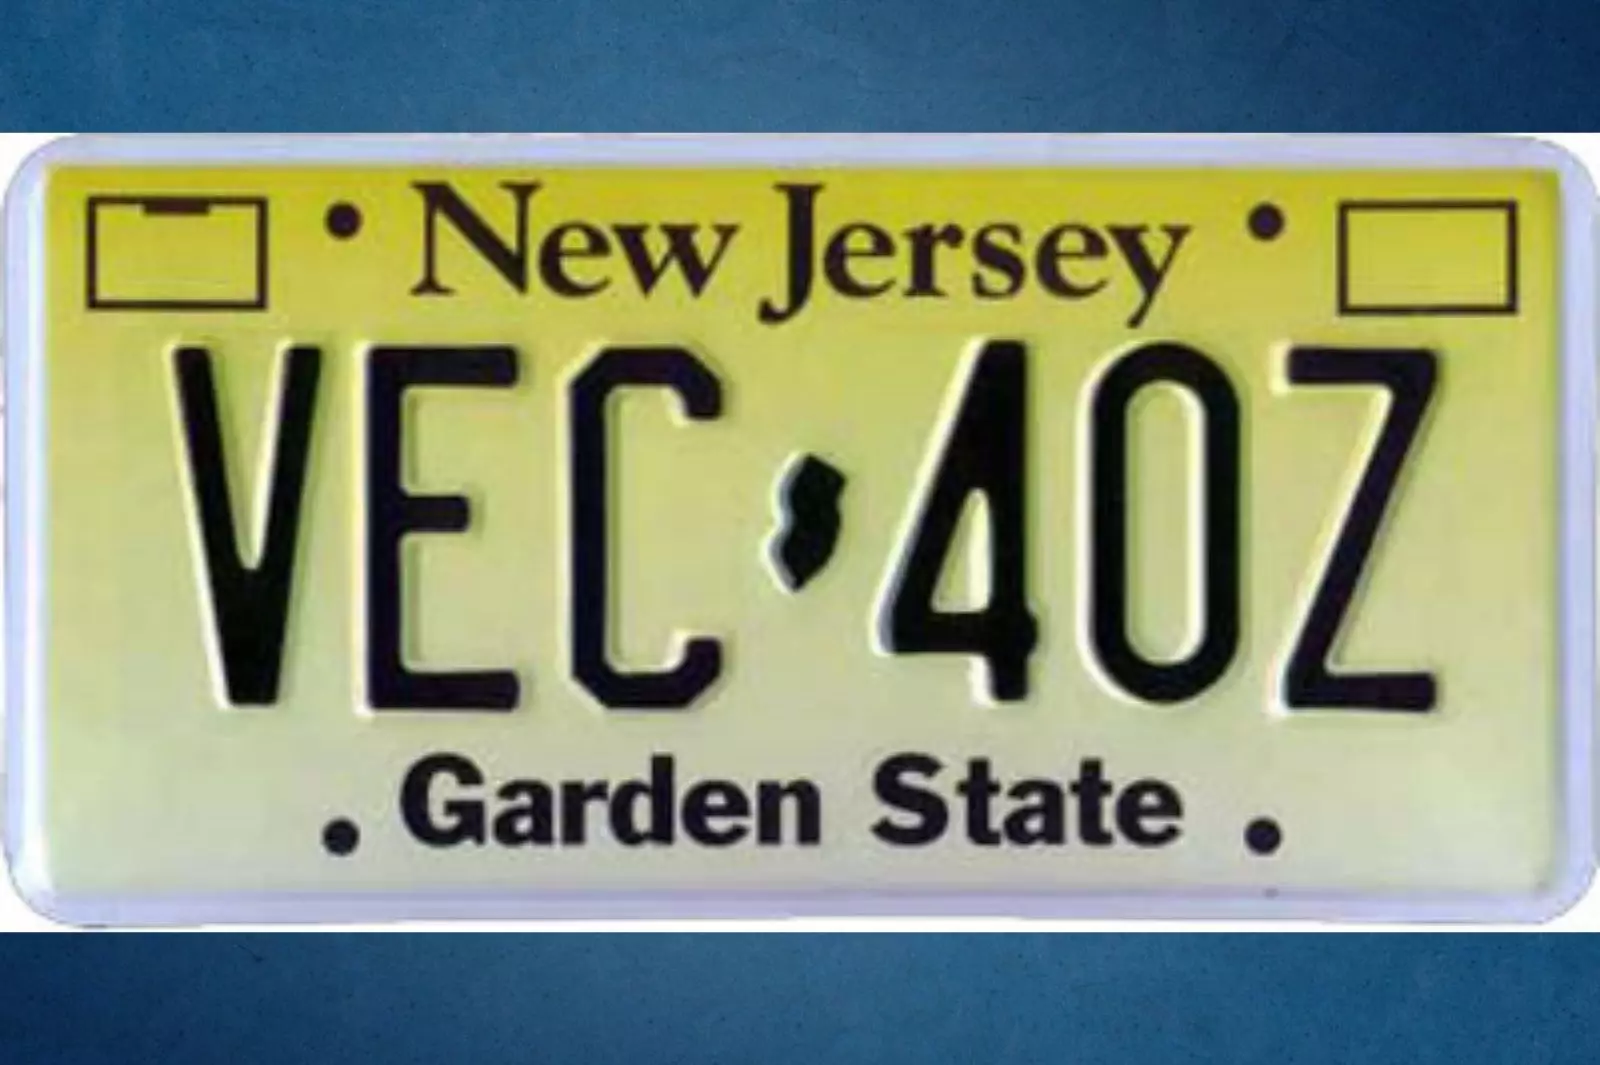 New Jersey's license plate is gross. It's time to make a new one